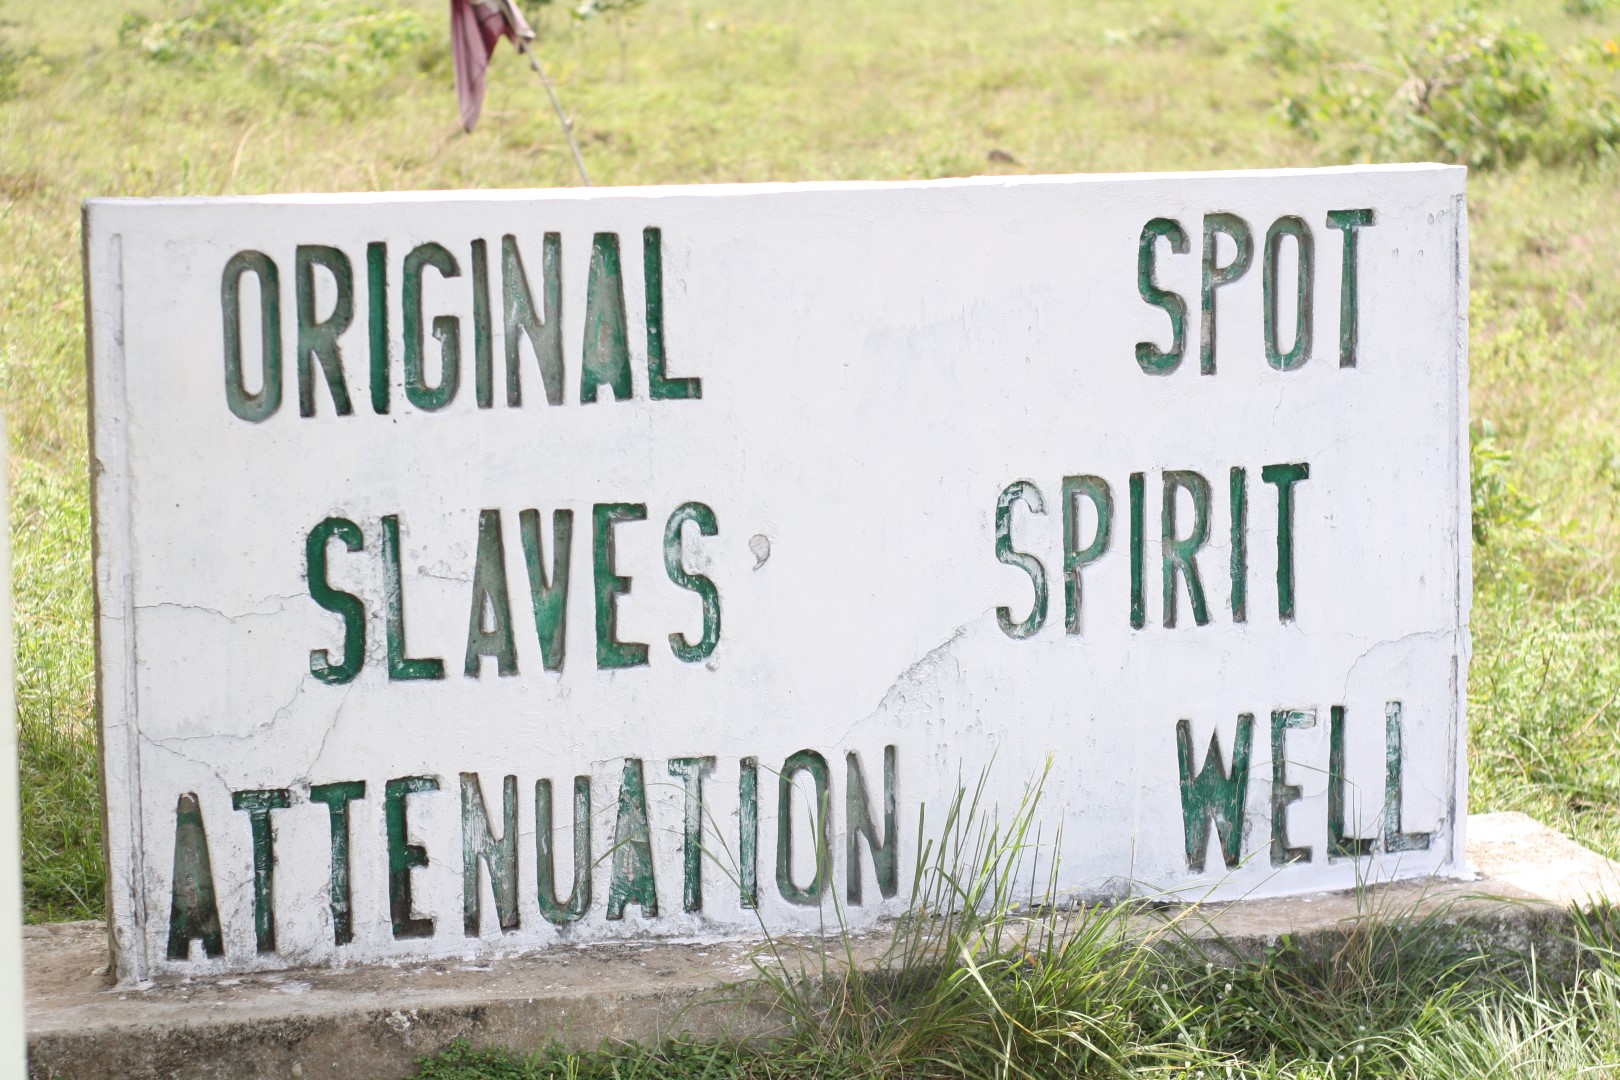 sign showing the original spot of the slaves spirit attenuation well in badagry, Lagos